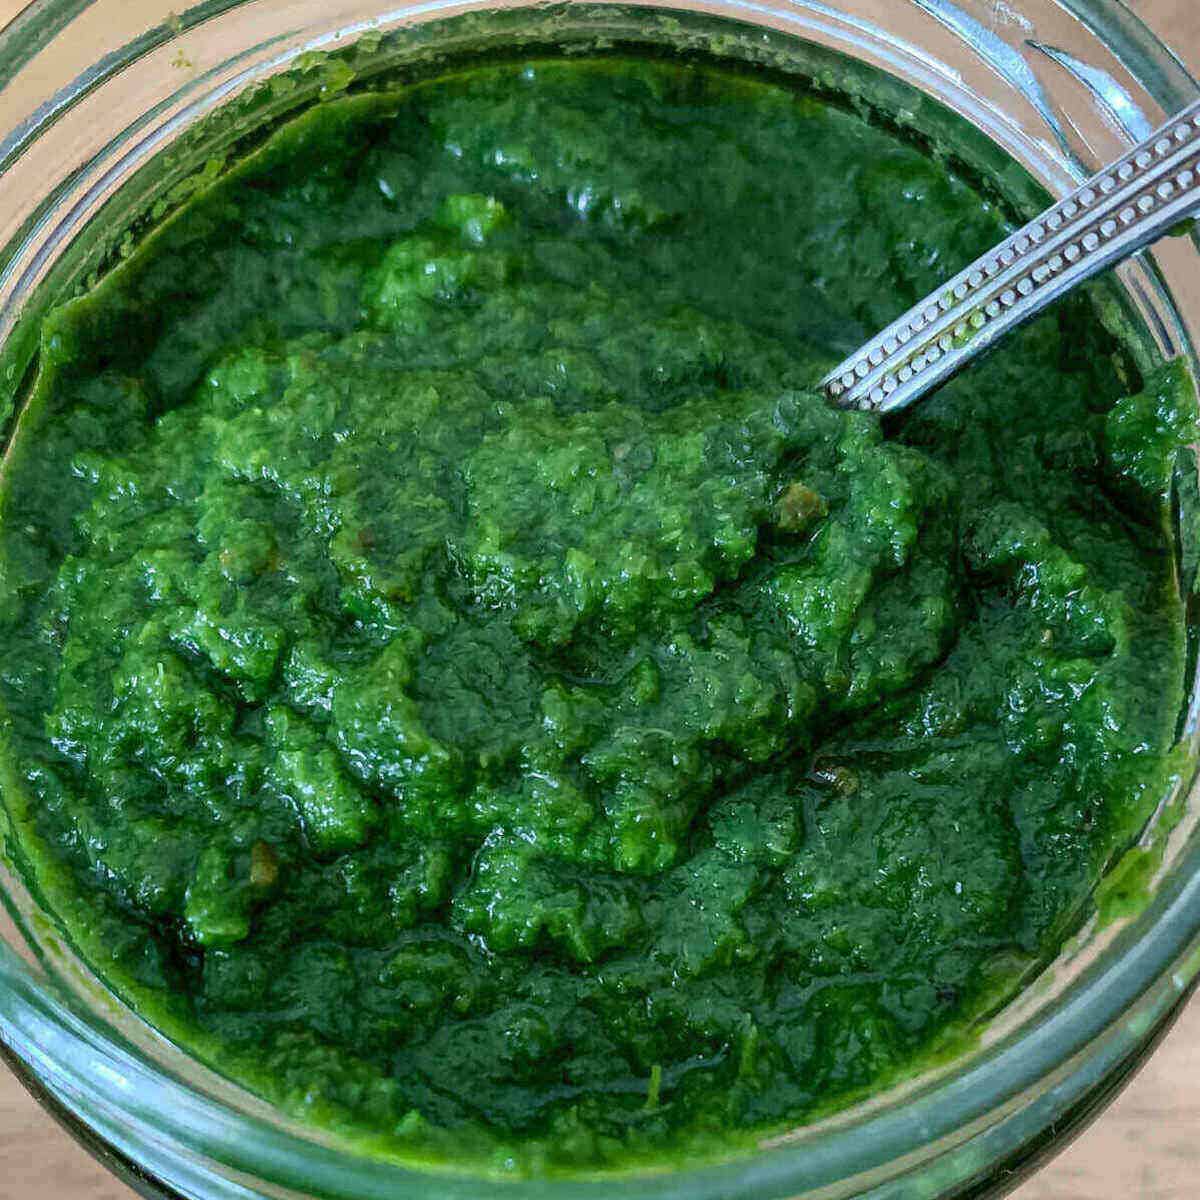 Cilantro mint chutney with amla gooseberry placed in a glass bottle and with a spoon placed in it for serving.